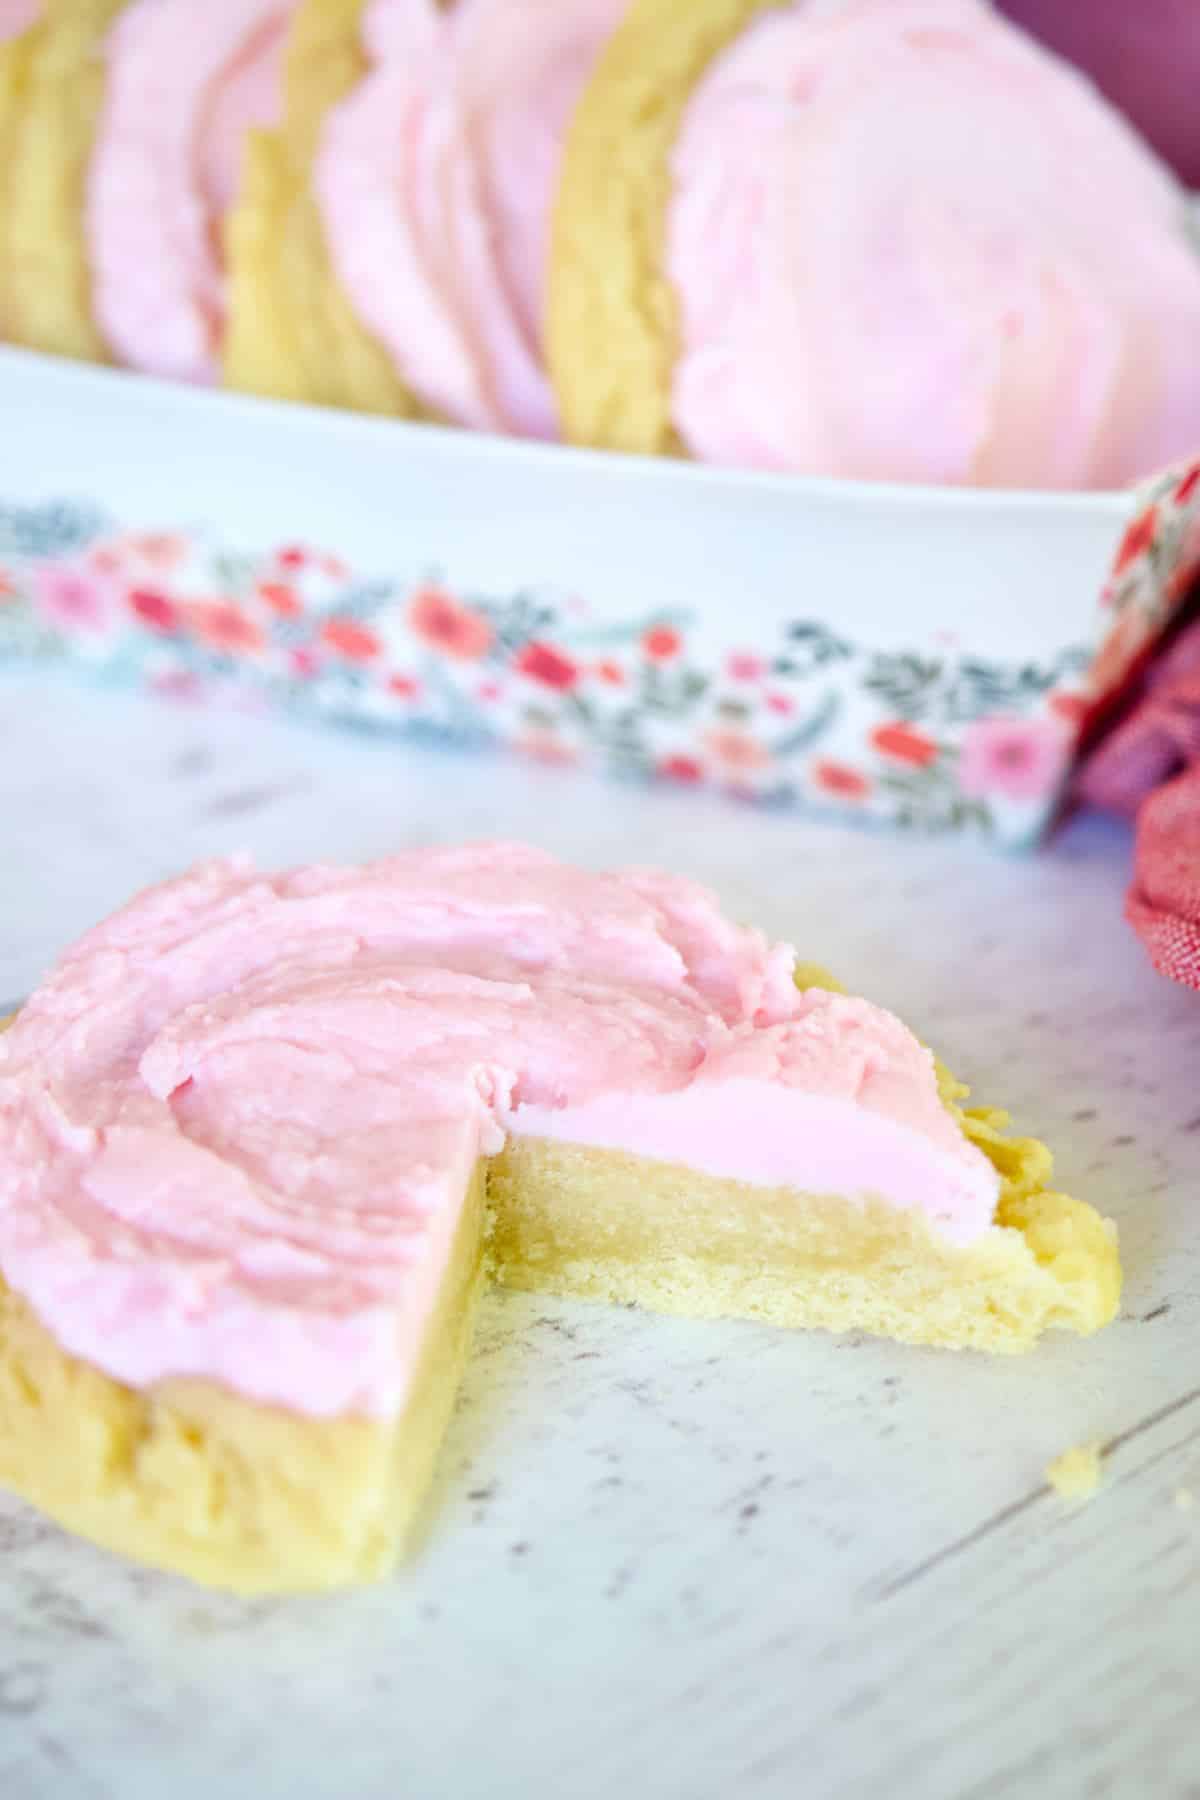 Crumbl Sugar Cookie on marble with pink frosting, with wedge removed revealing a soft, doughy, chewy center of the cookie.